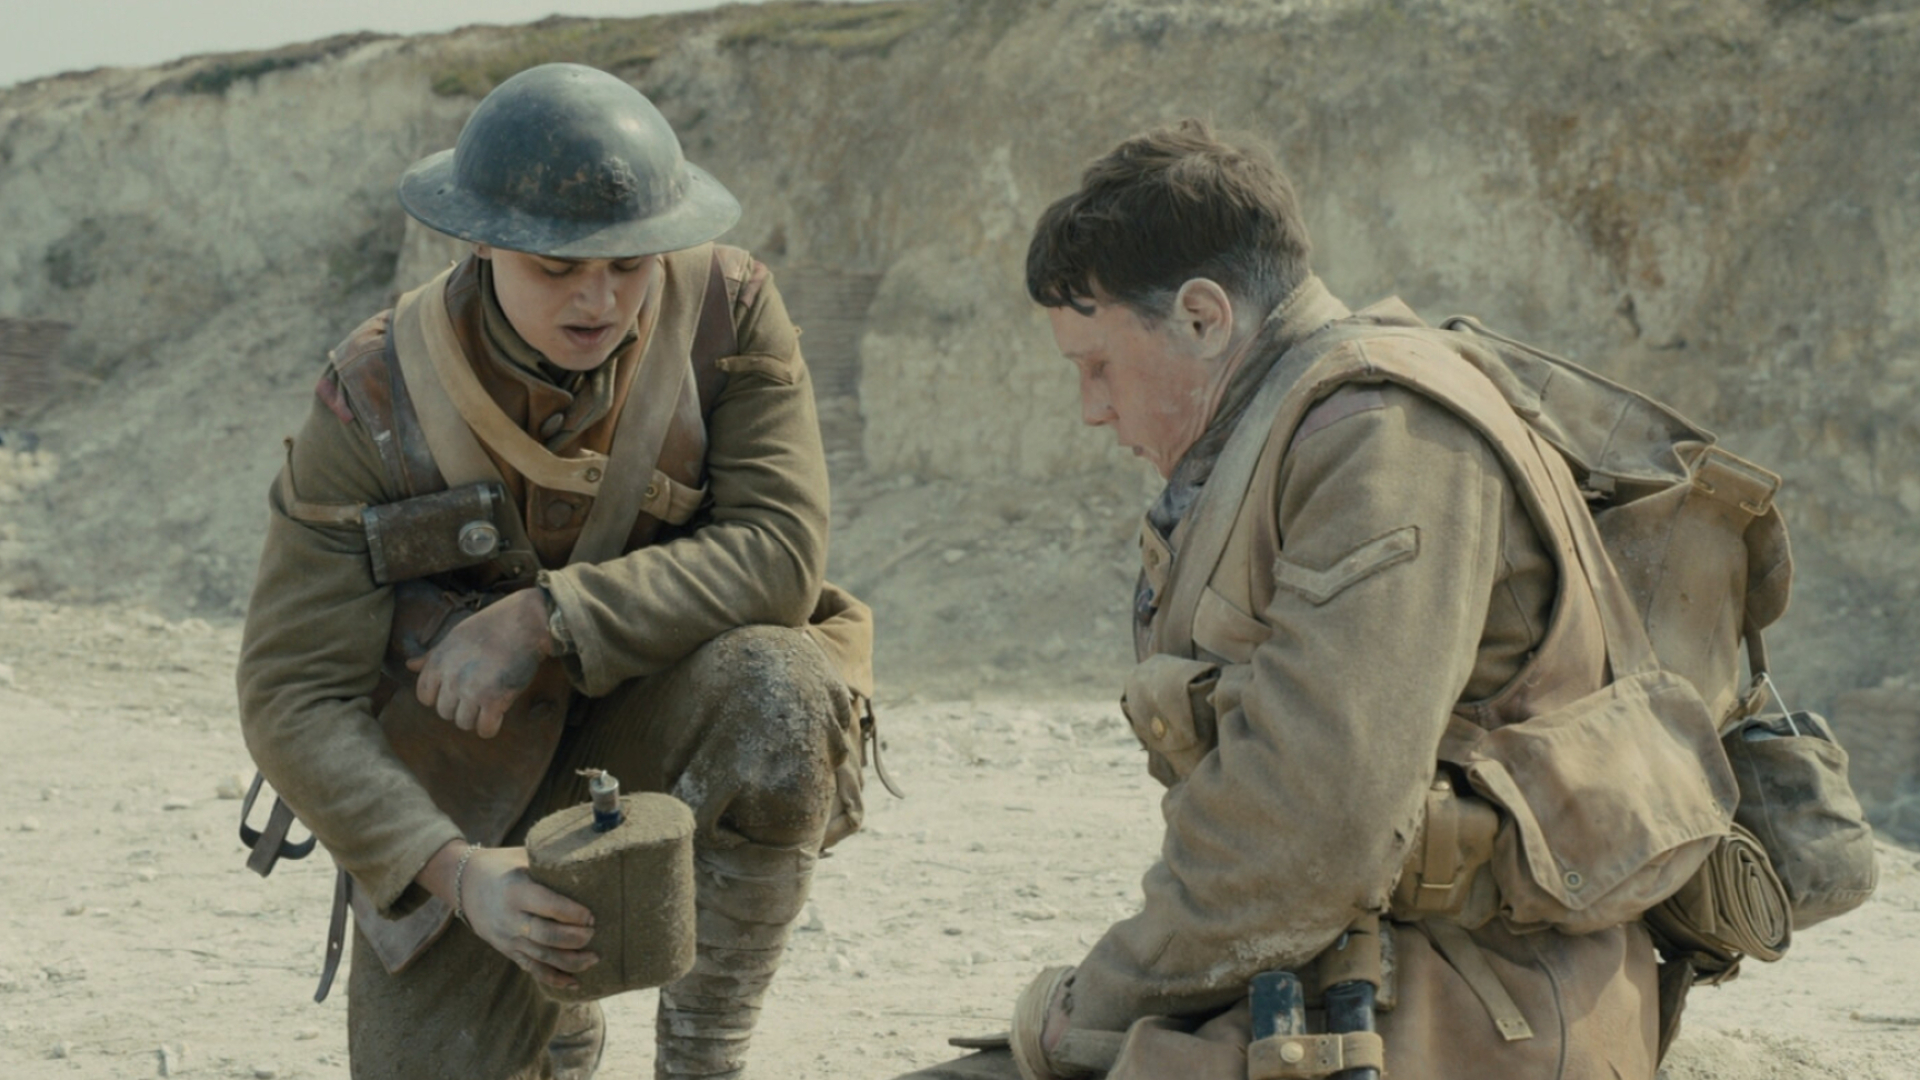 1917 (Movie): Filming began on 1 April 2019 and continued through June 2019. 1920x1080 Full HD Background.